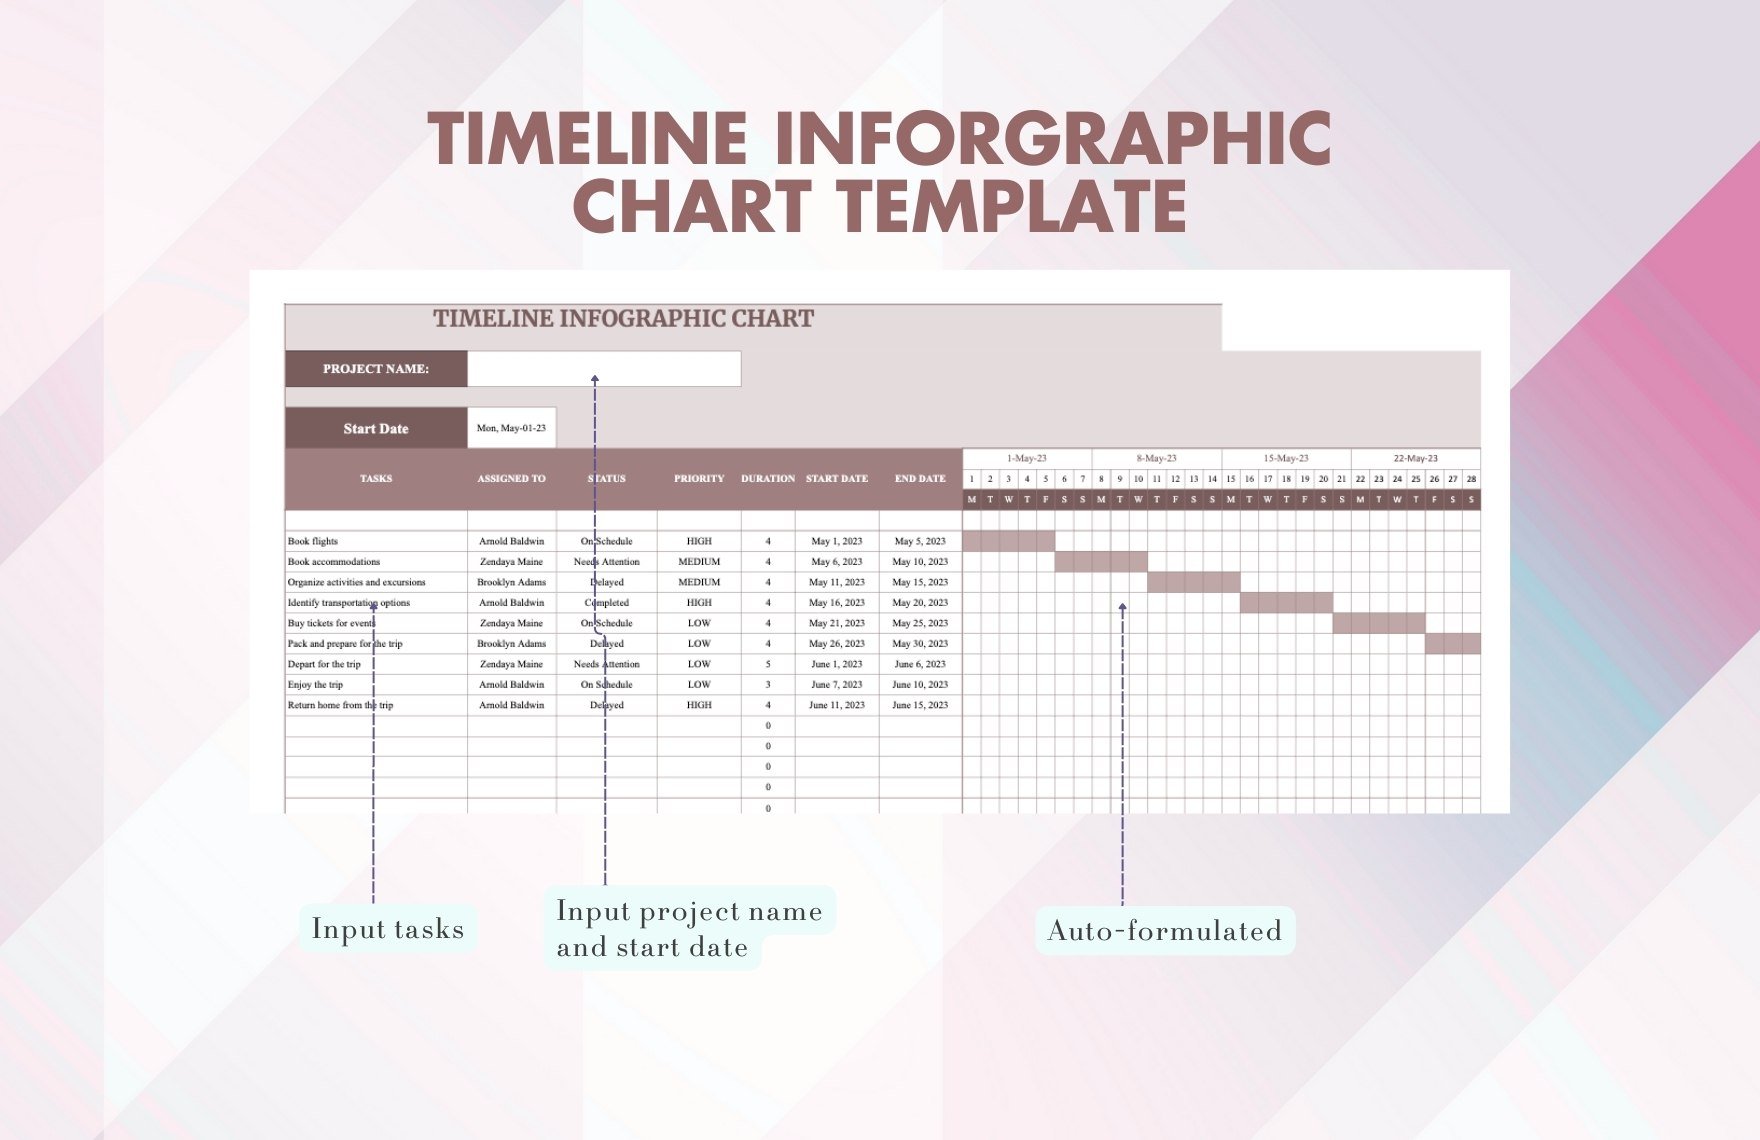 Timeline Infographic Chart Template